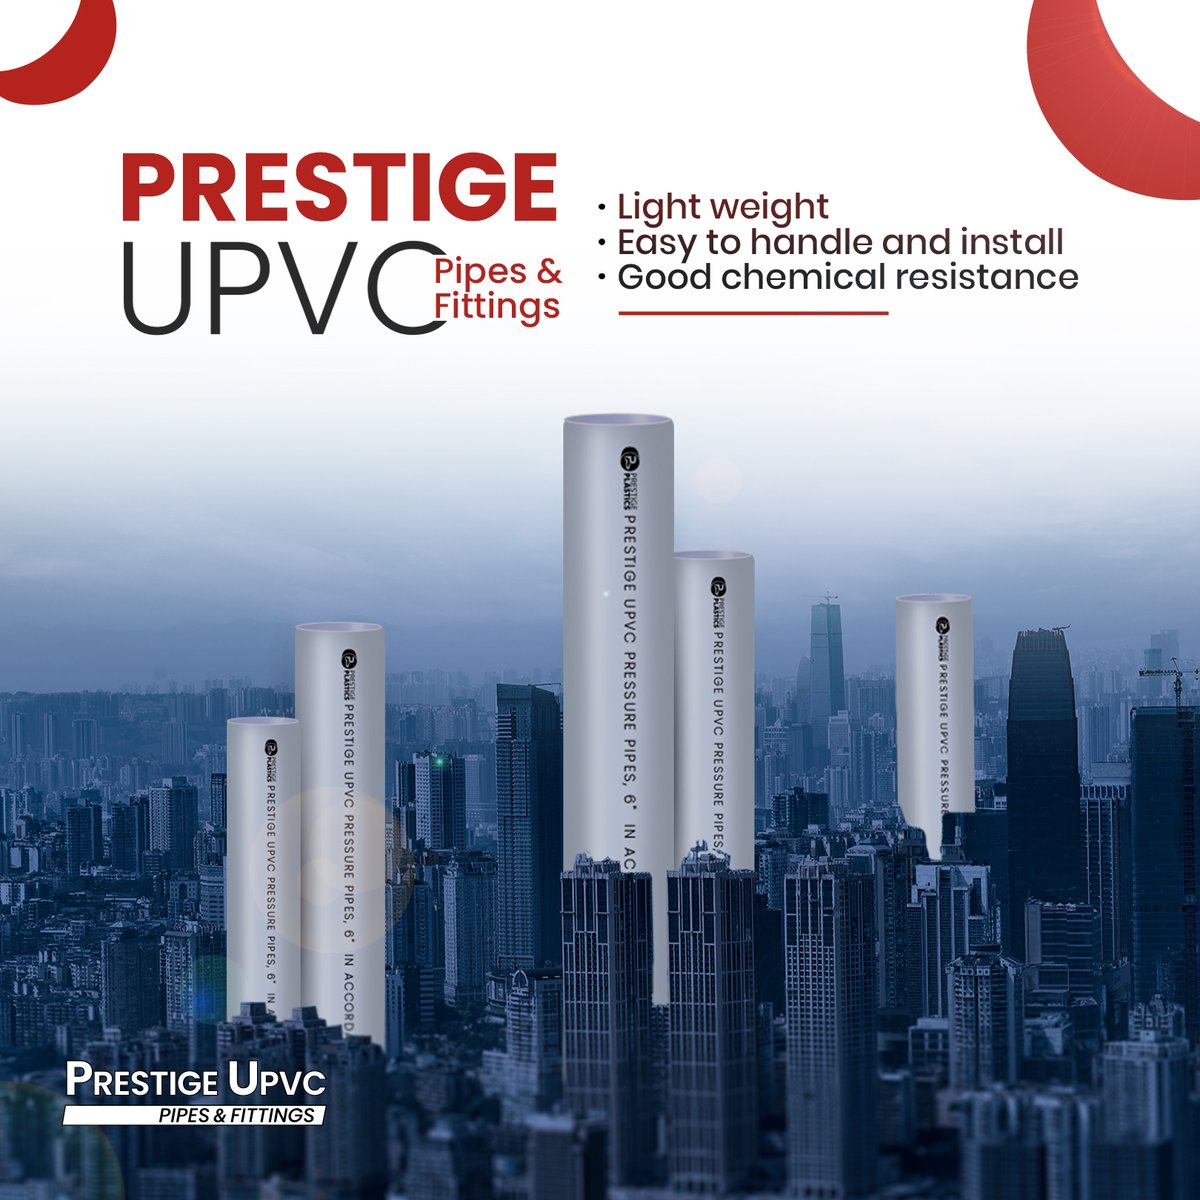 Rise above the urban jungle with Prestige UPVC Pipes & Fittings. Tailored for the modern skyline, they offer the lightness for easy installation. With Prestige, it’s not just about building, it’s about outlasting. 🌃🚧